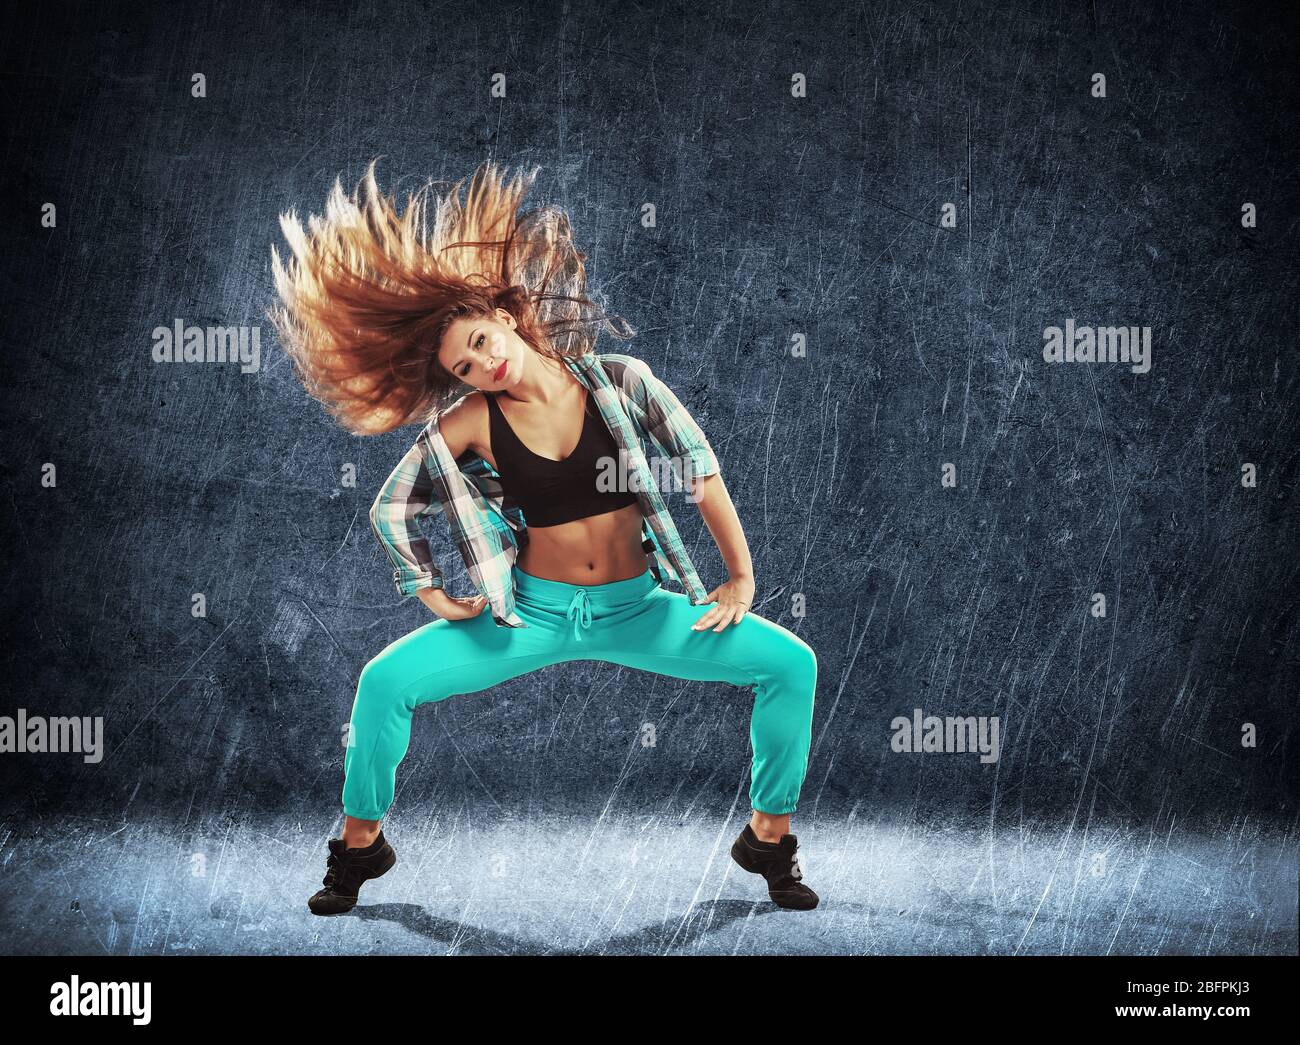 Young hip-hop dancer on grunge background Stock Photo - Alamy